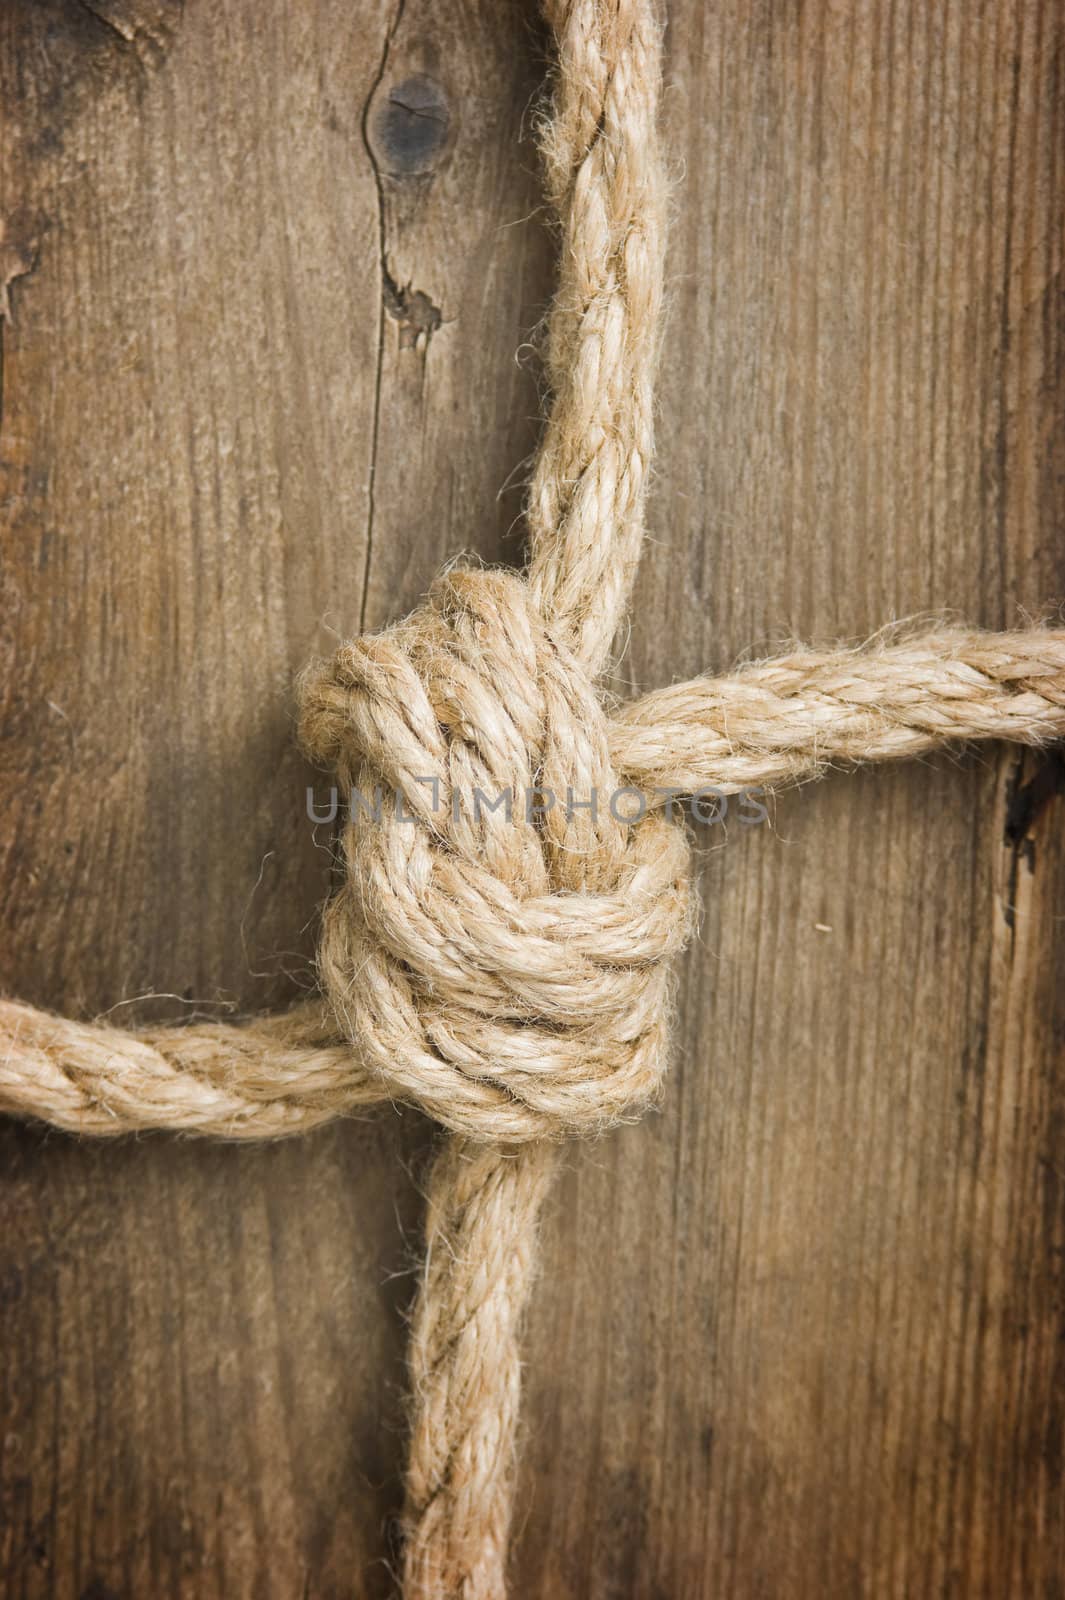 Rope with knots on the background of the old wooden boards